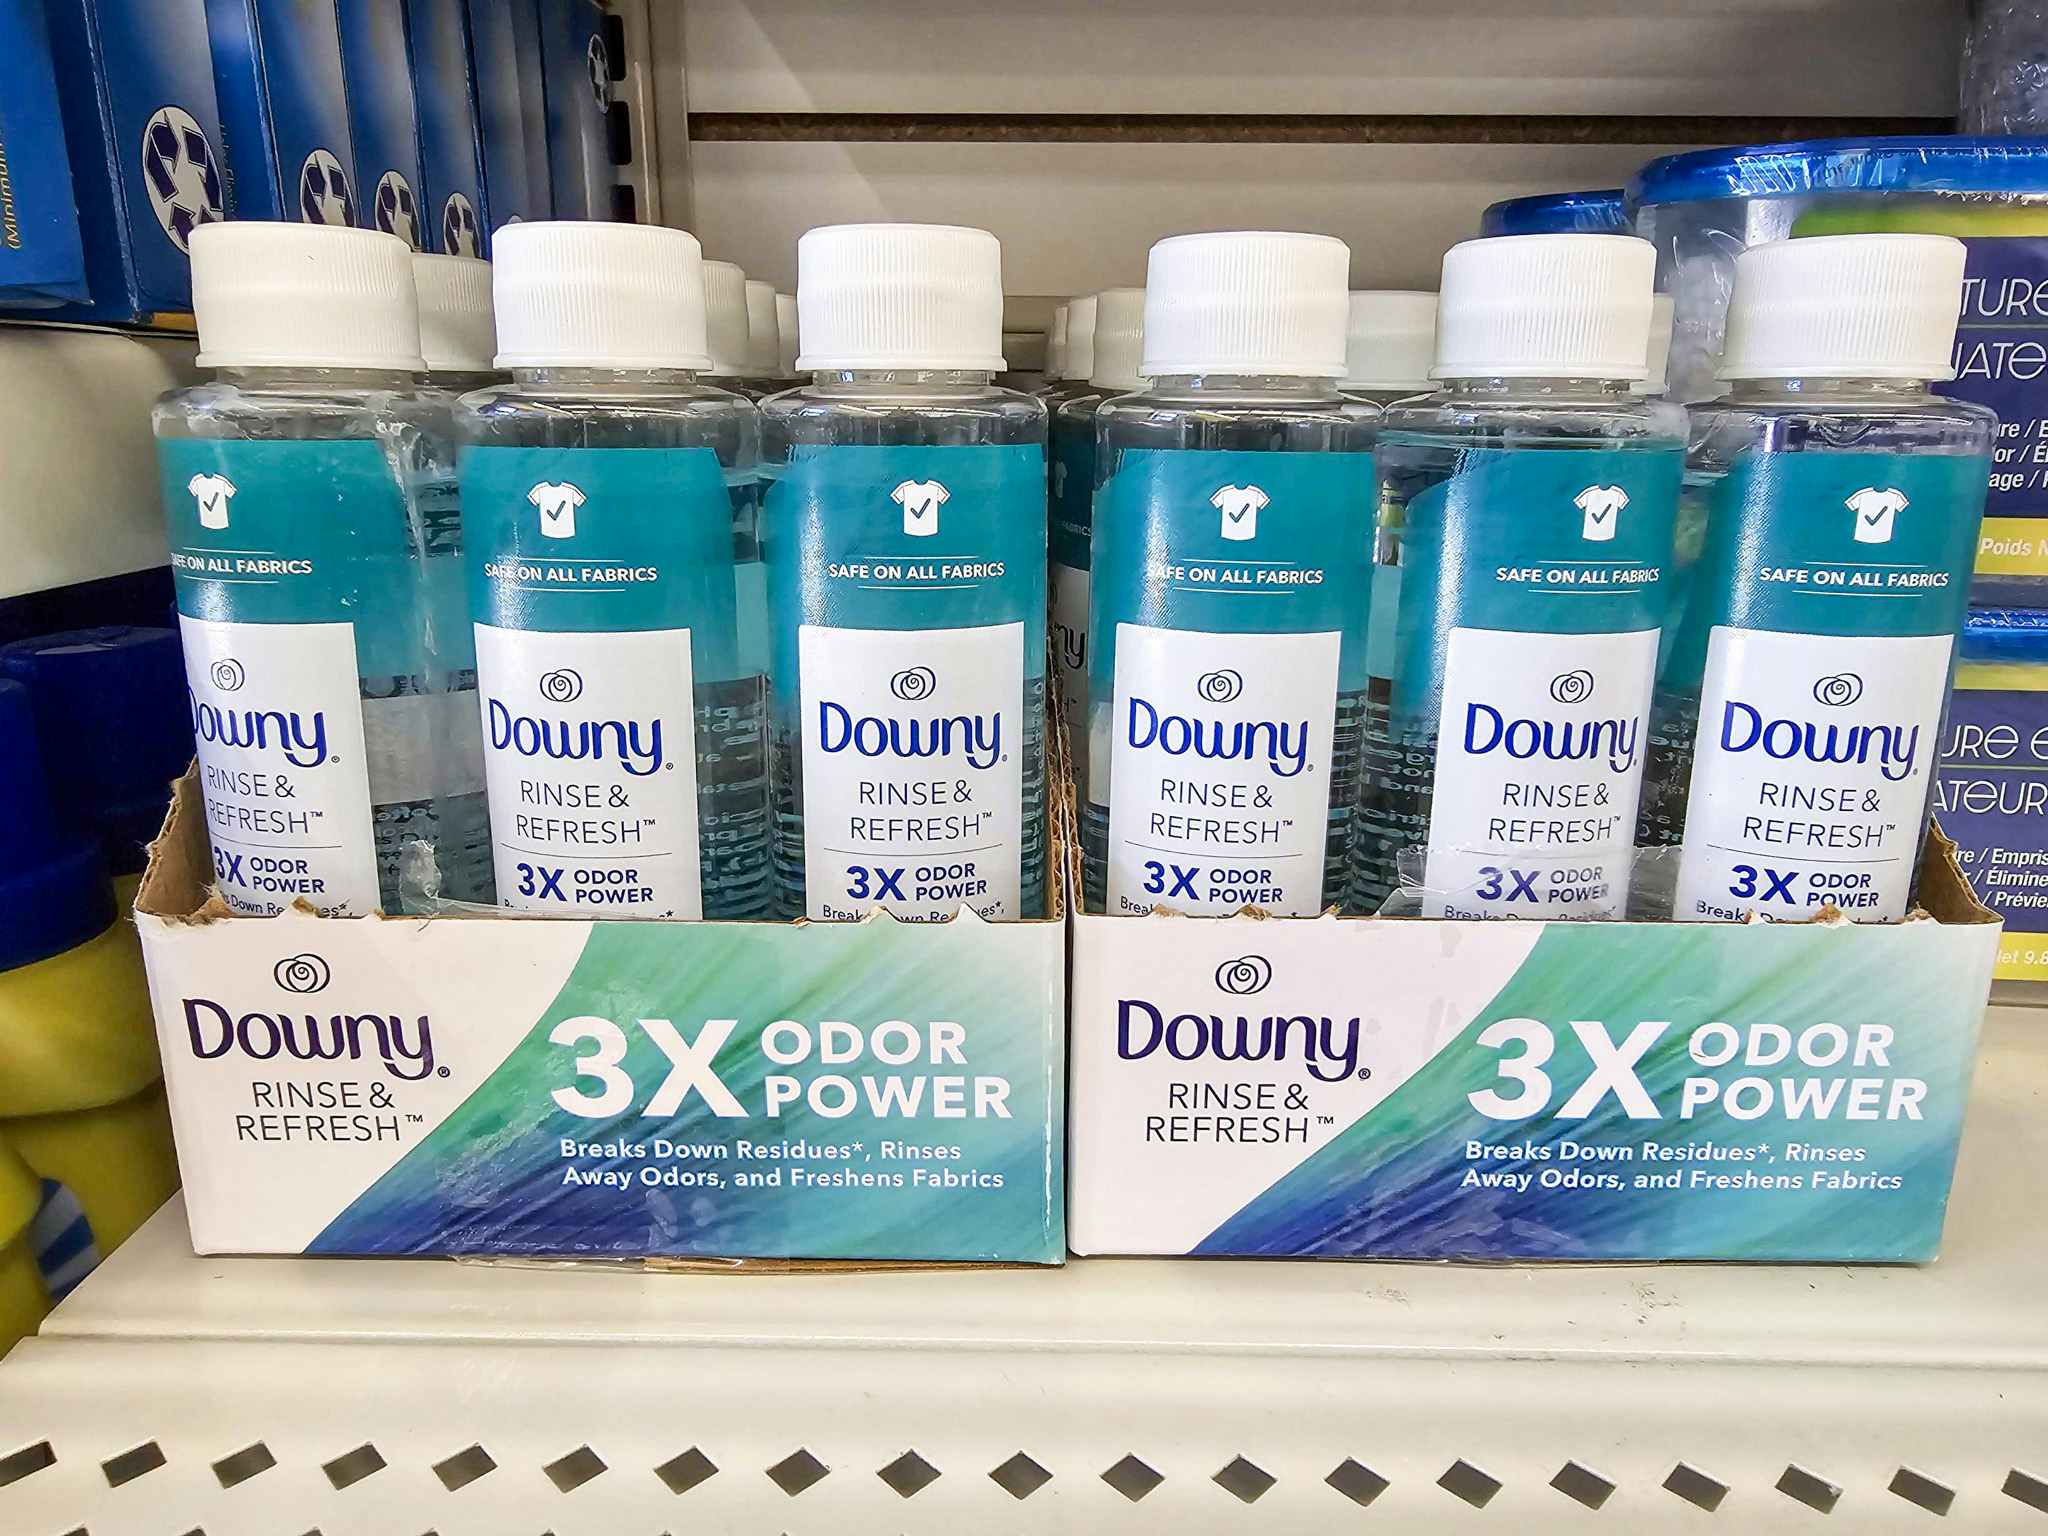 shelf with bottles of downy rinse and refresh